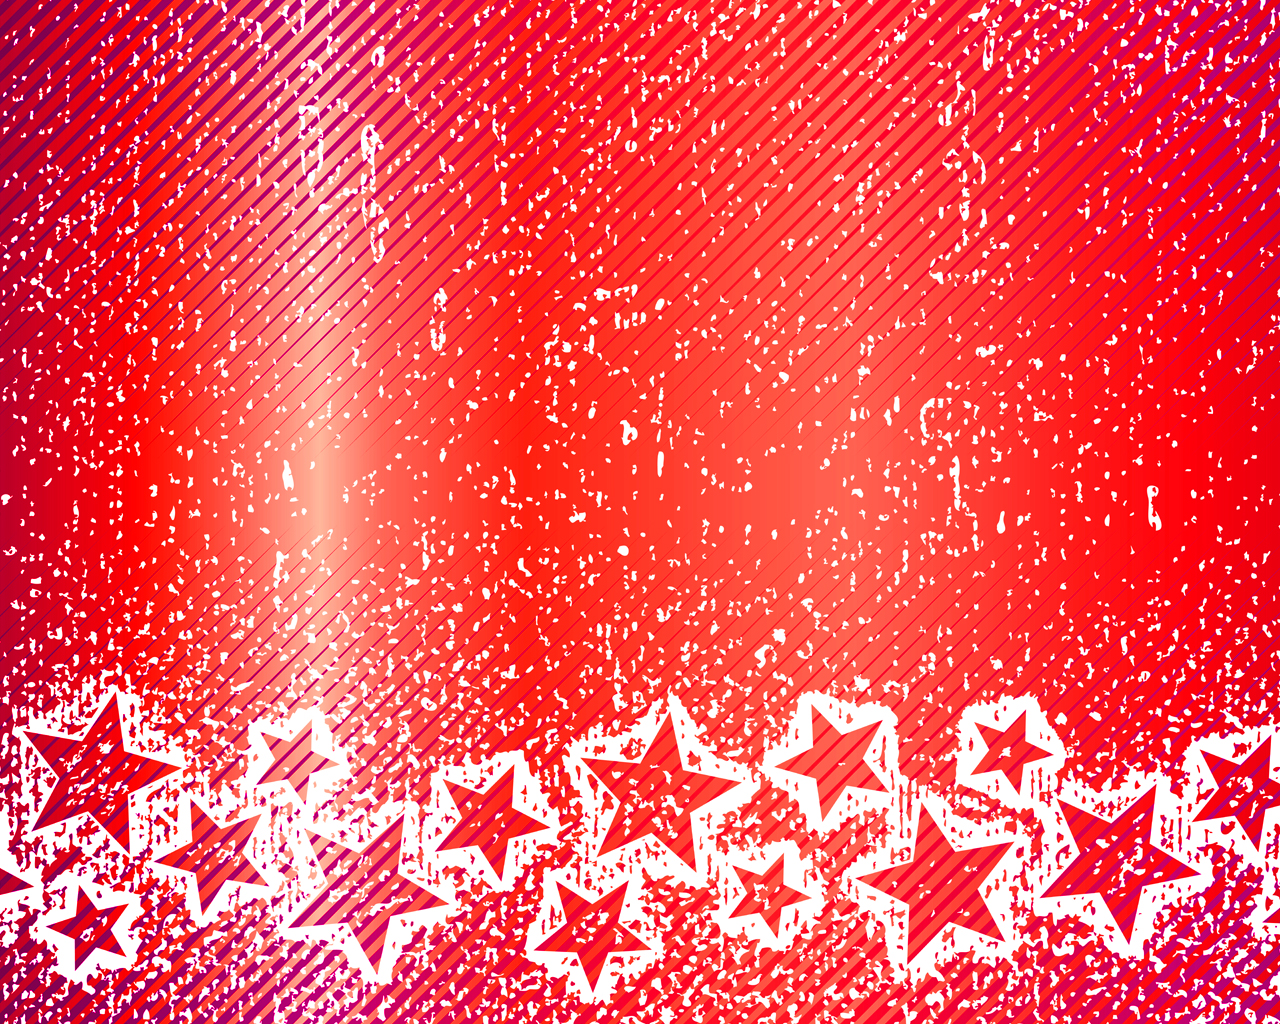 Star Patterns on Red powerpoint background